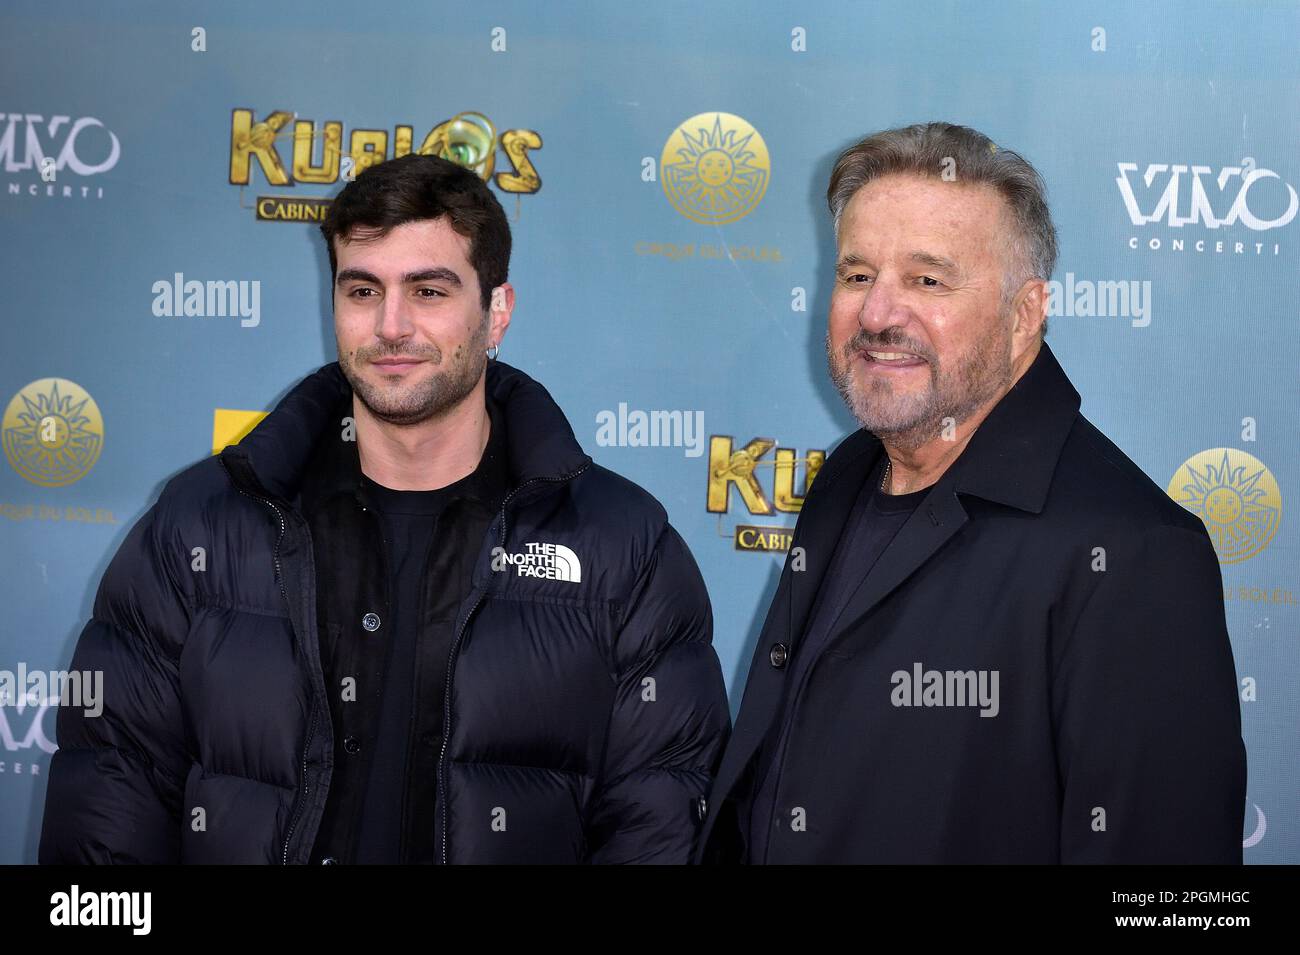 Rome, Italy. 22nd Mar, 2023. Francesco Brun and Christian De Sica attends the Premiere of Cirque du Soleil's 'Kurios: Cabinet Of Curiosities' on March 22, 2023 in Rome, Italy. Credit: dpa/Alamy Live News Stock Photo